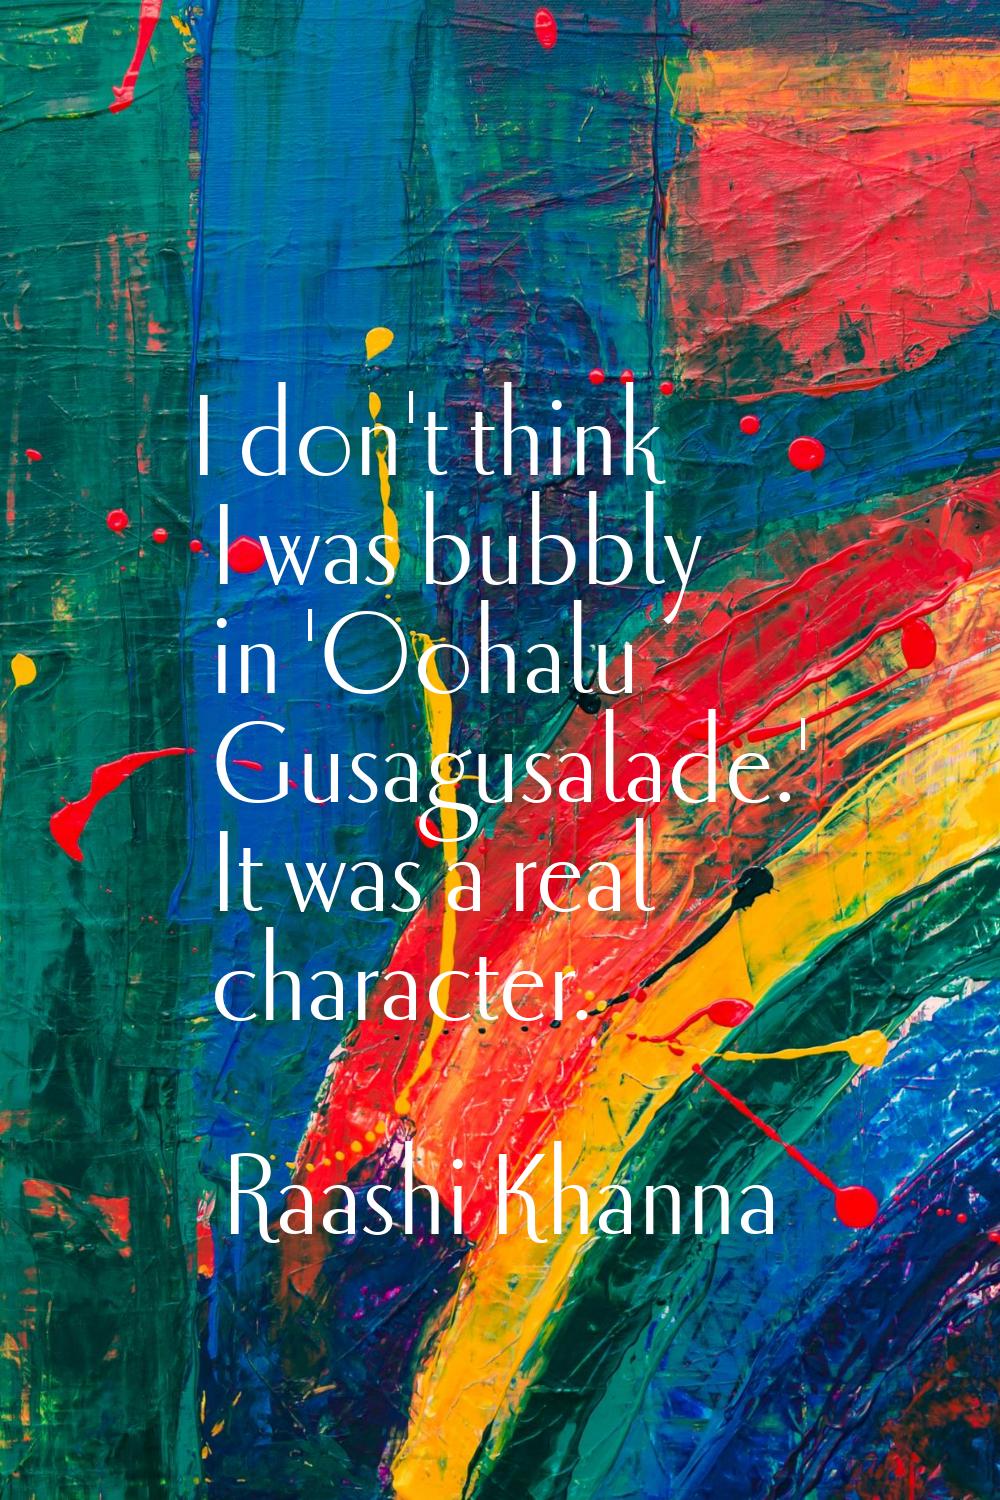 I don't think I was bubbly in 'Oohalu Gusagusalade.' It was a real character.